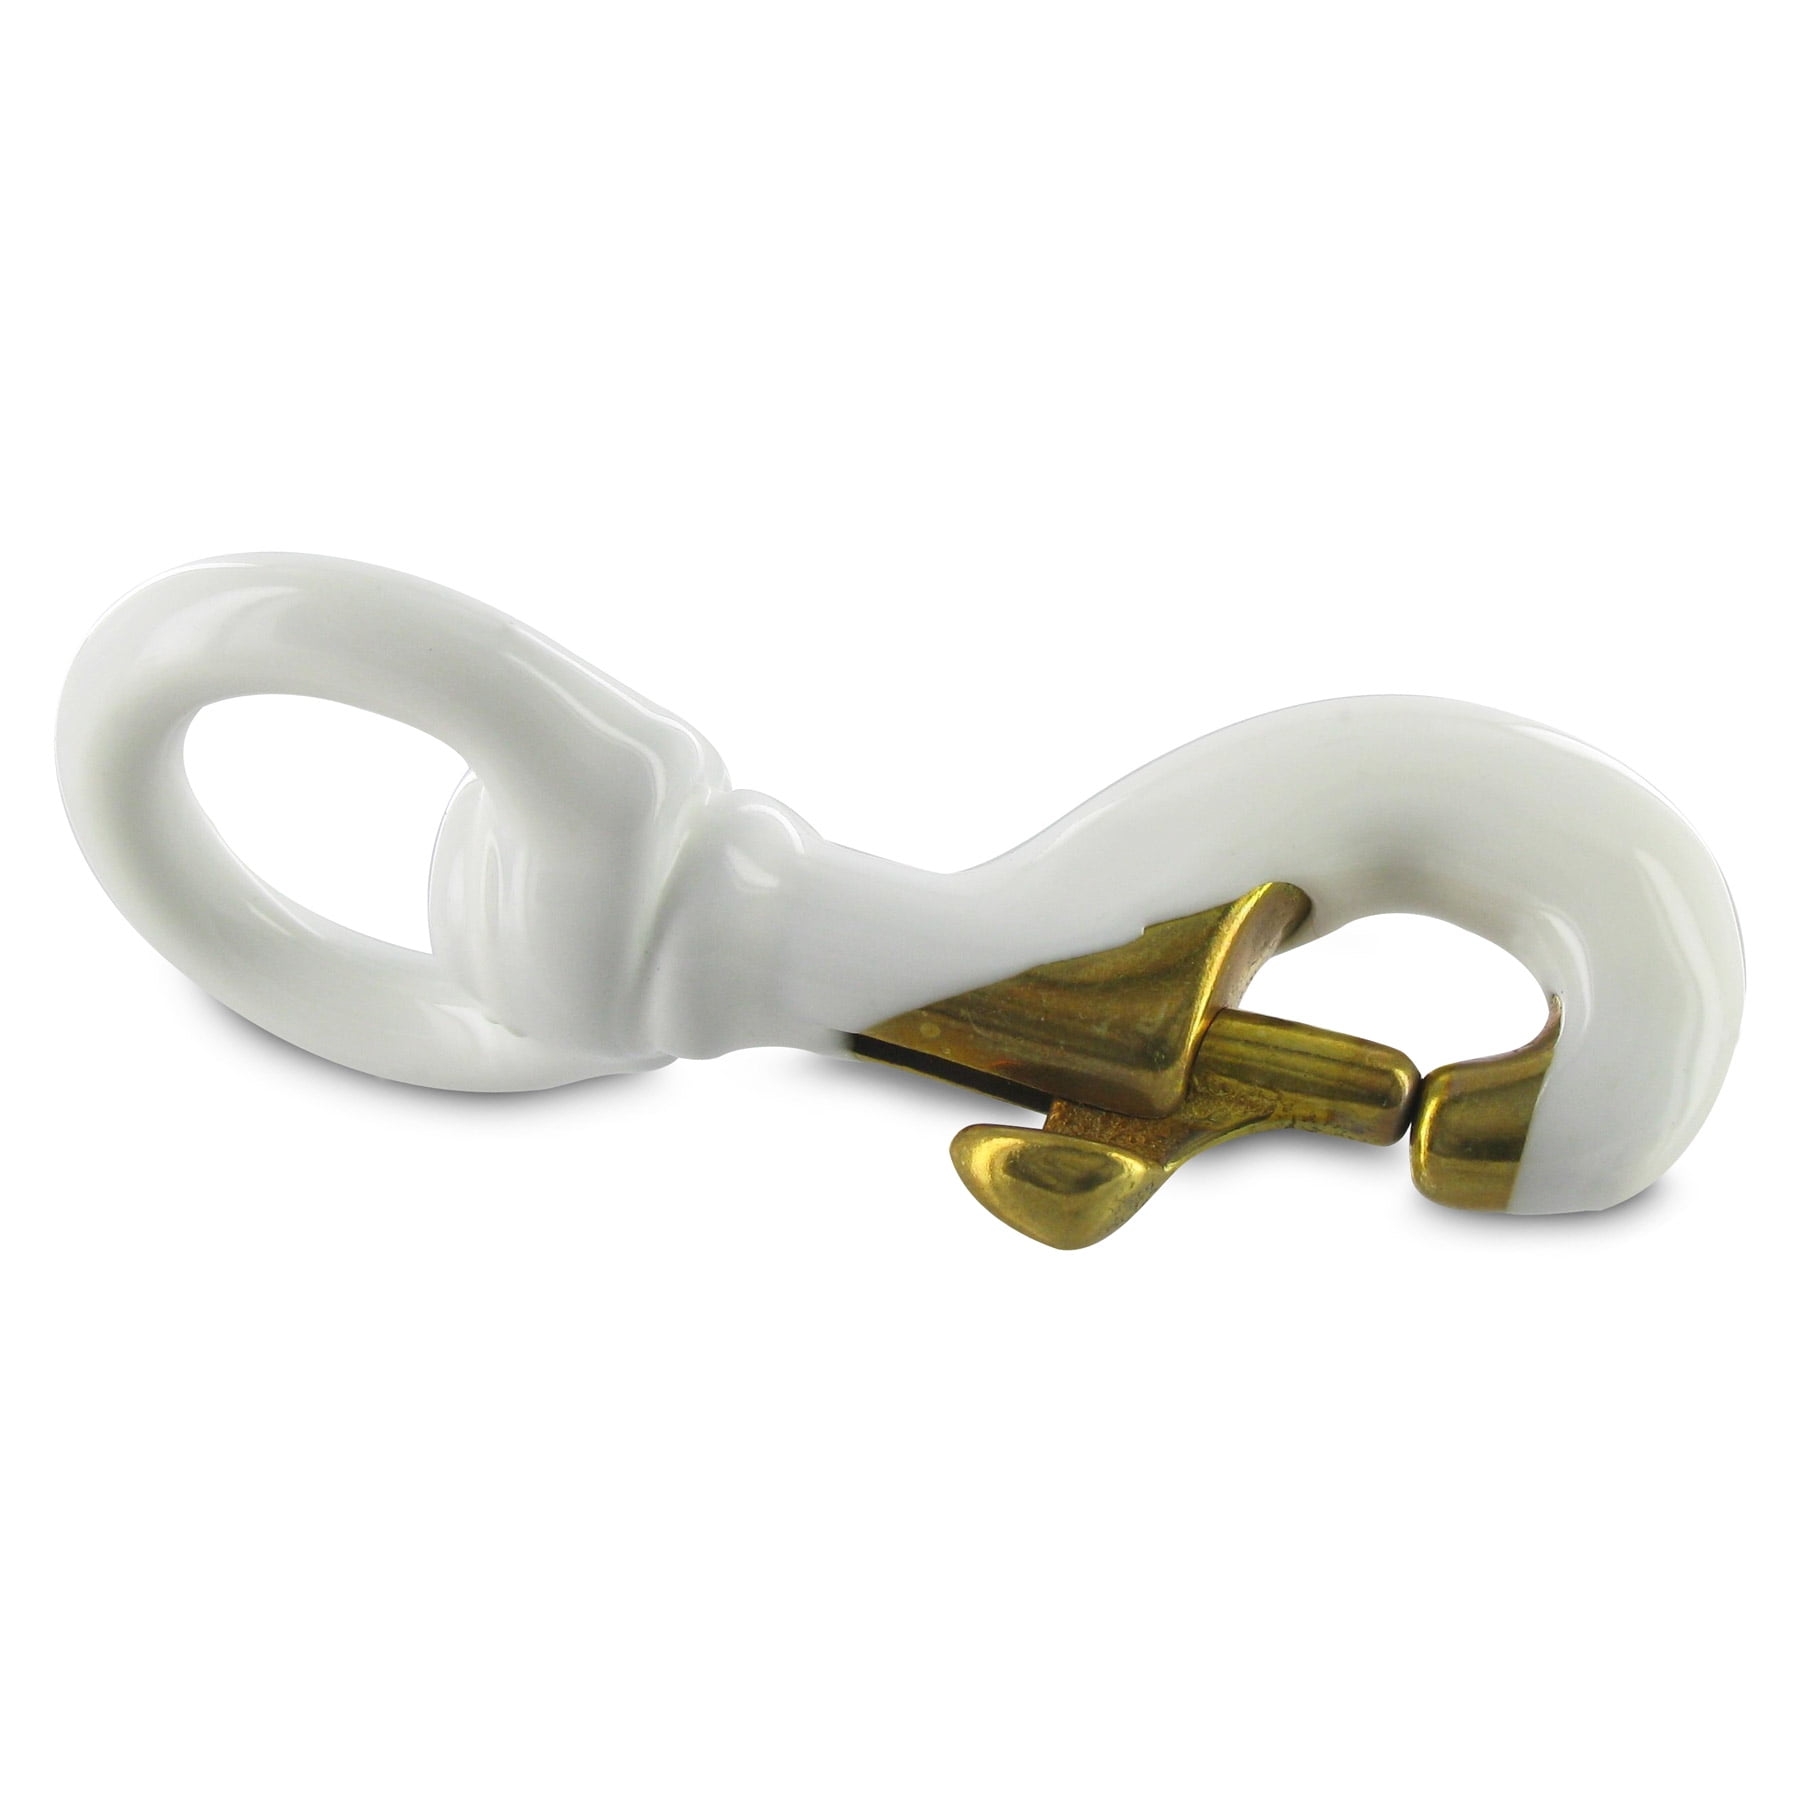 Rubber Coated Brass Swivel Snap - 3 Pair